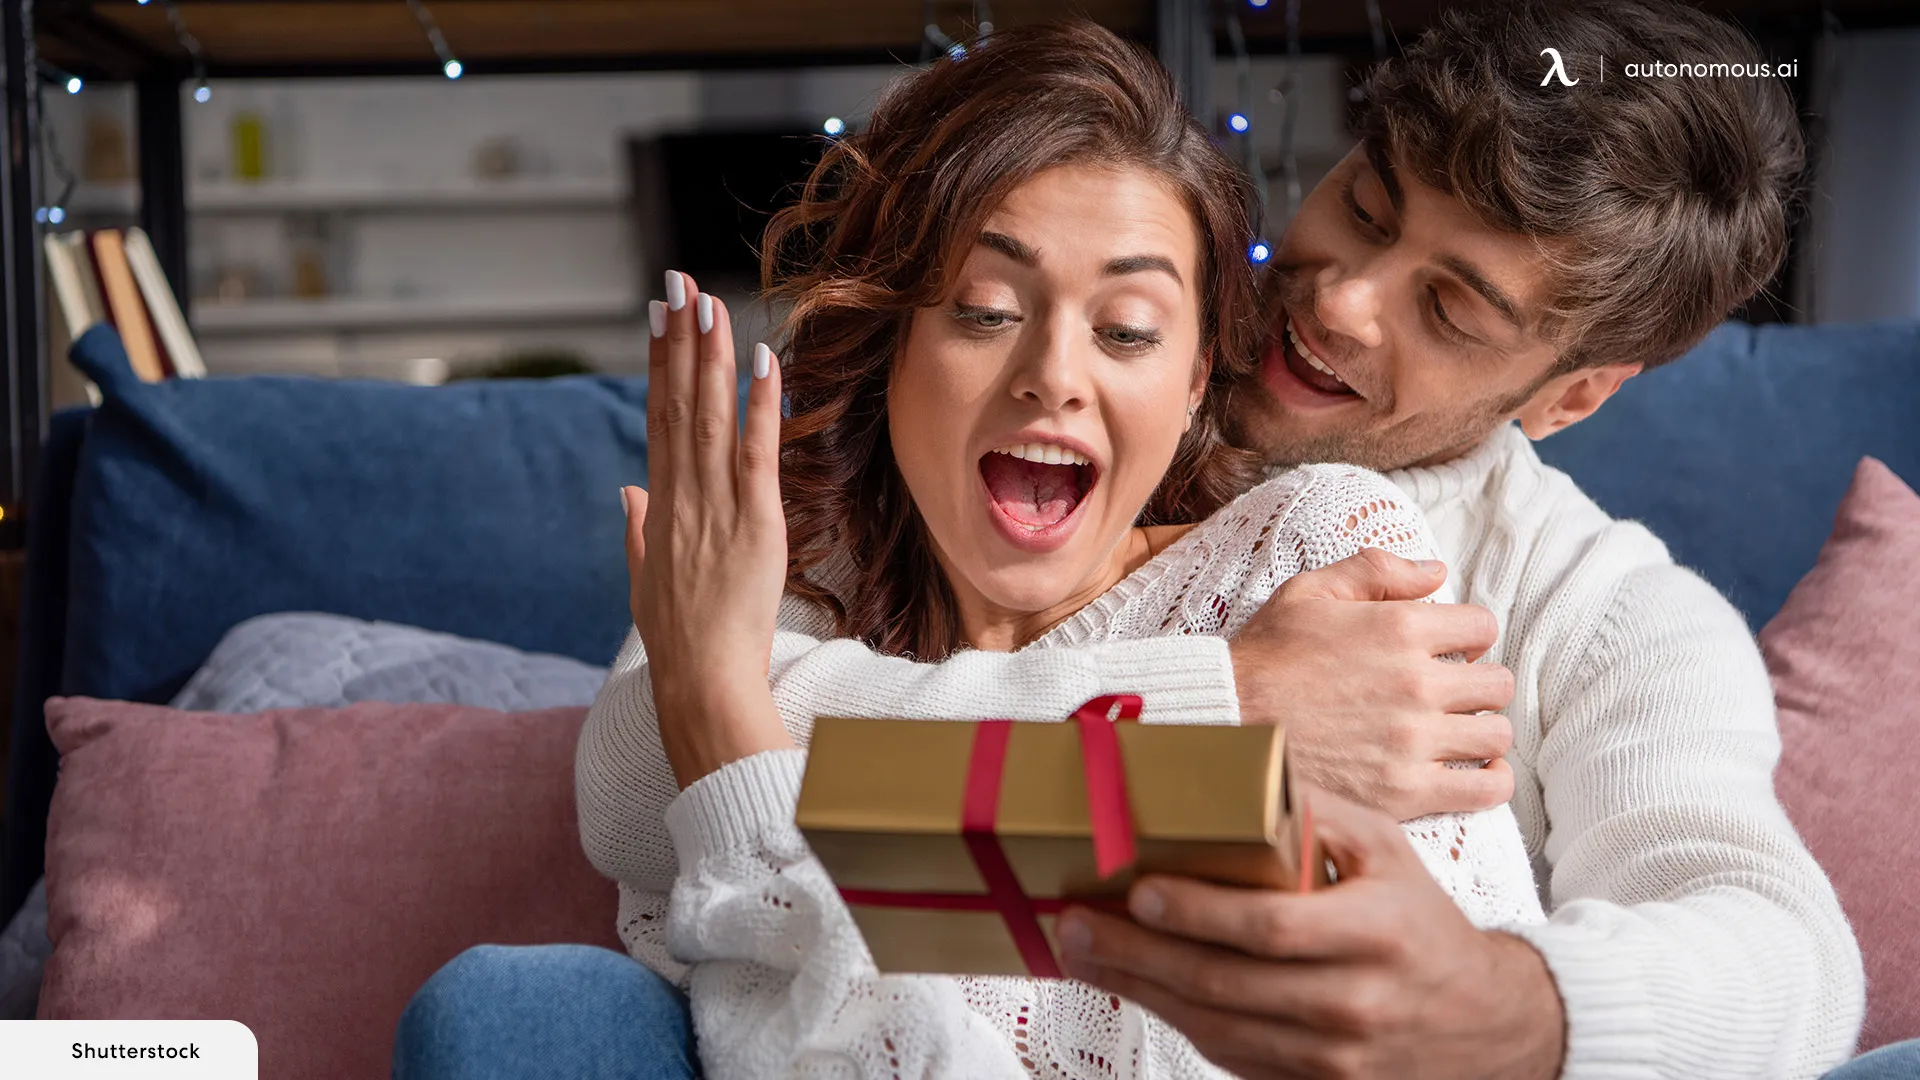 Love Wrapped: The New Year Gift for Your Girlfriend